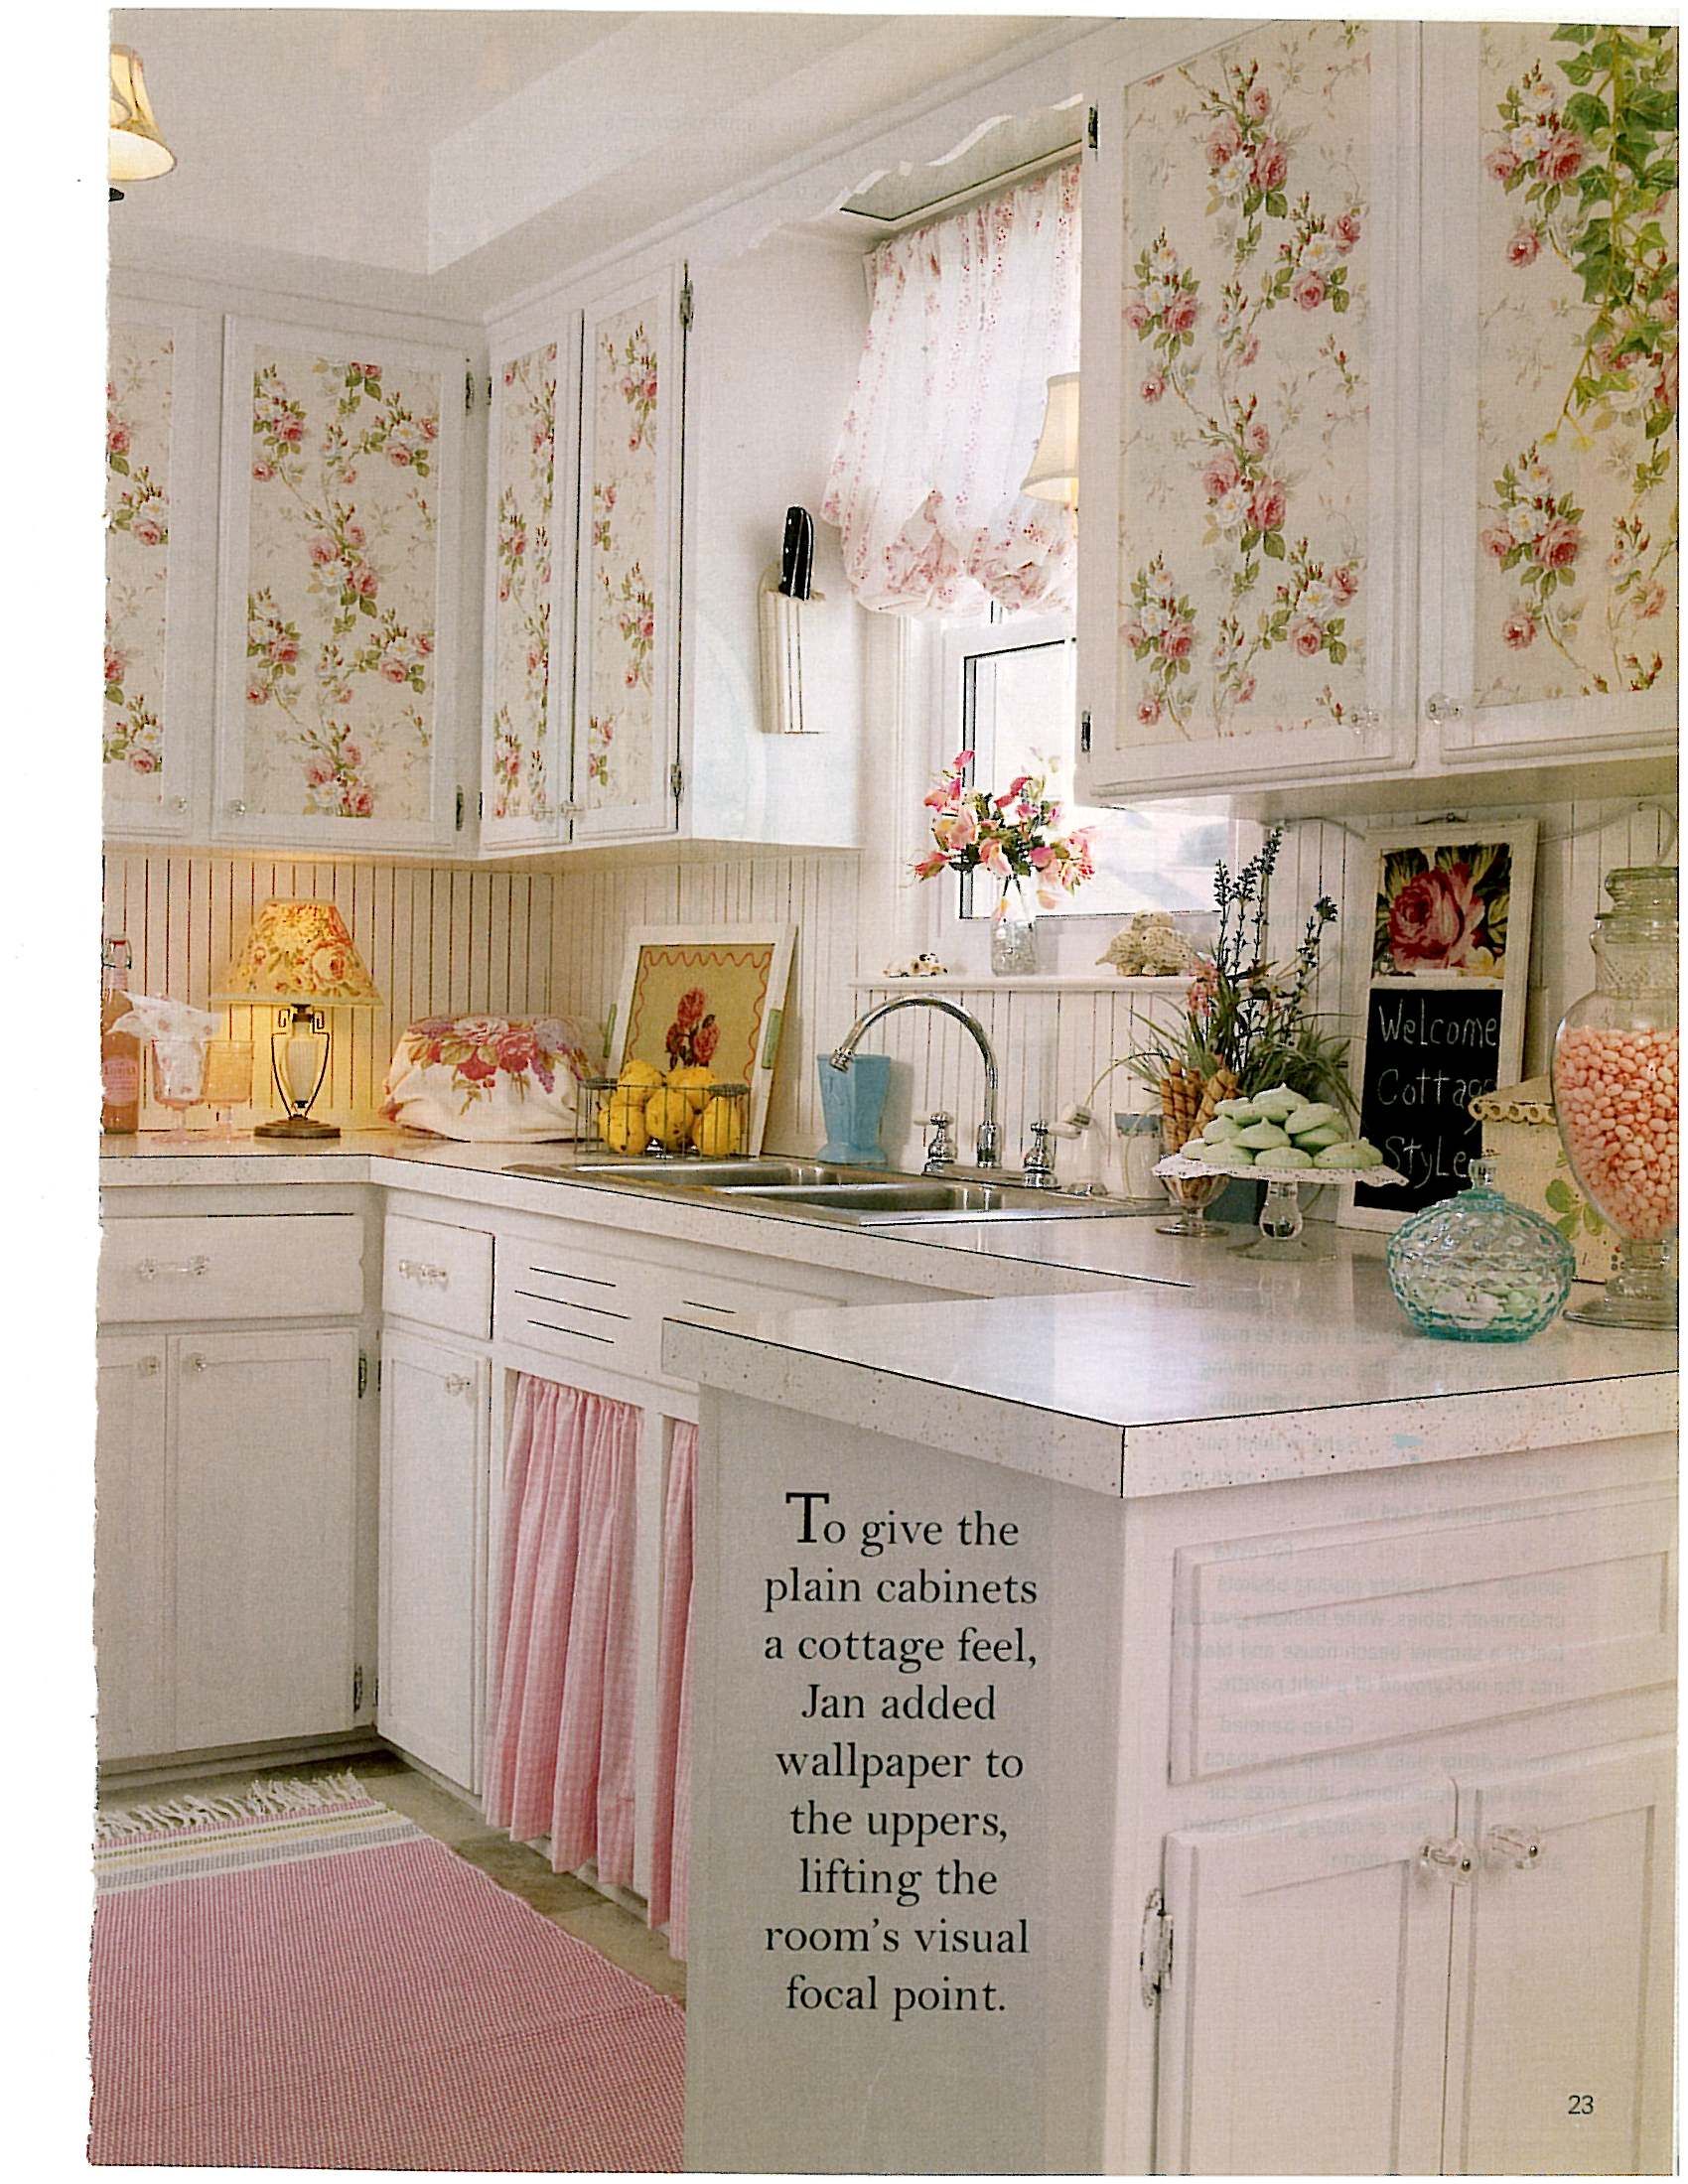 matching wallpaper and curtains,furniture,room,kitchen,cabinetry,pink